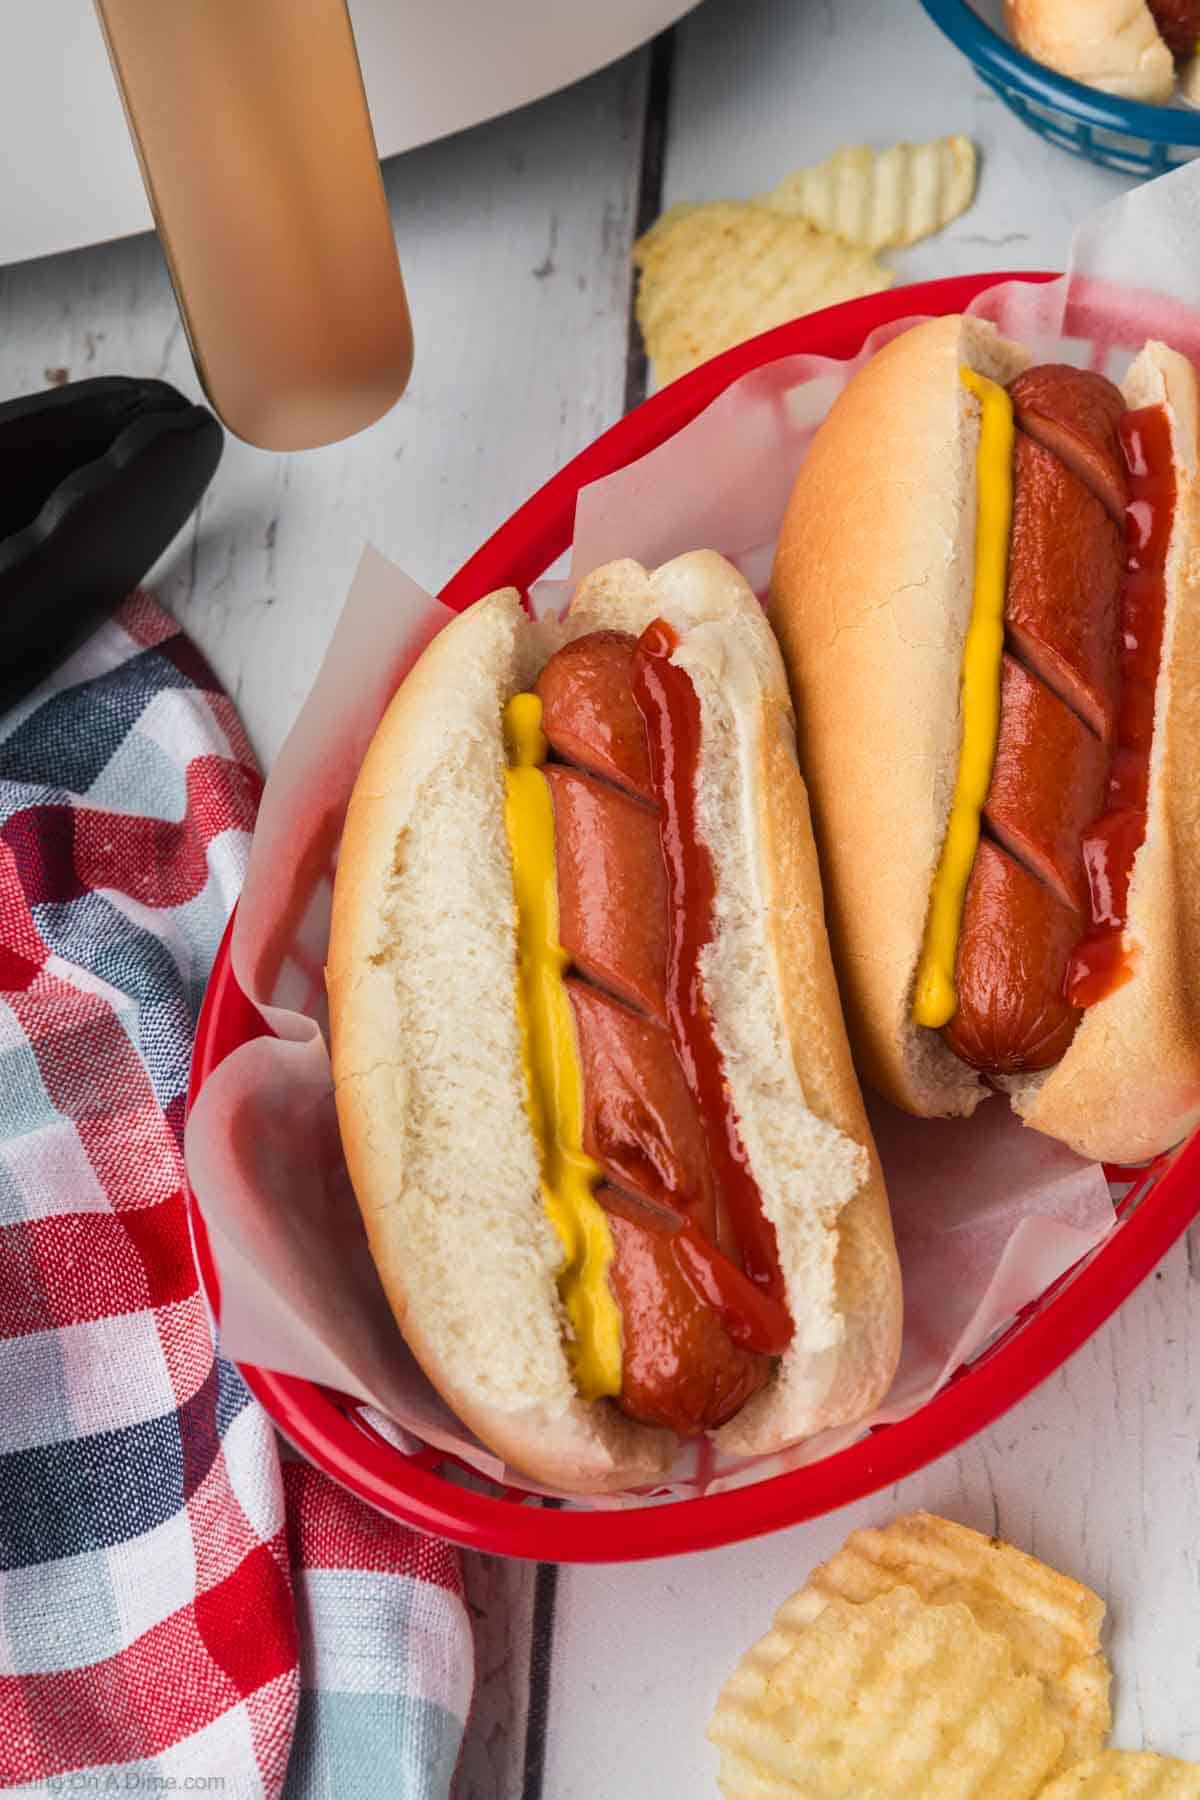 Hot Dogs in a red basket lined with parchment paper. The hot dogs are topped with mustard and ketchup